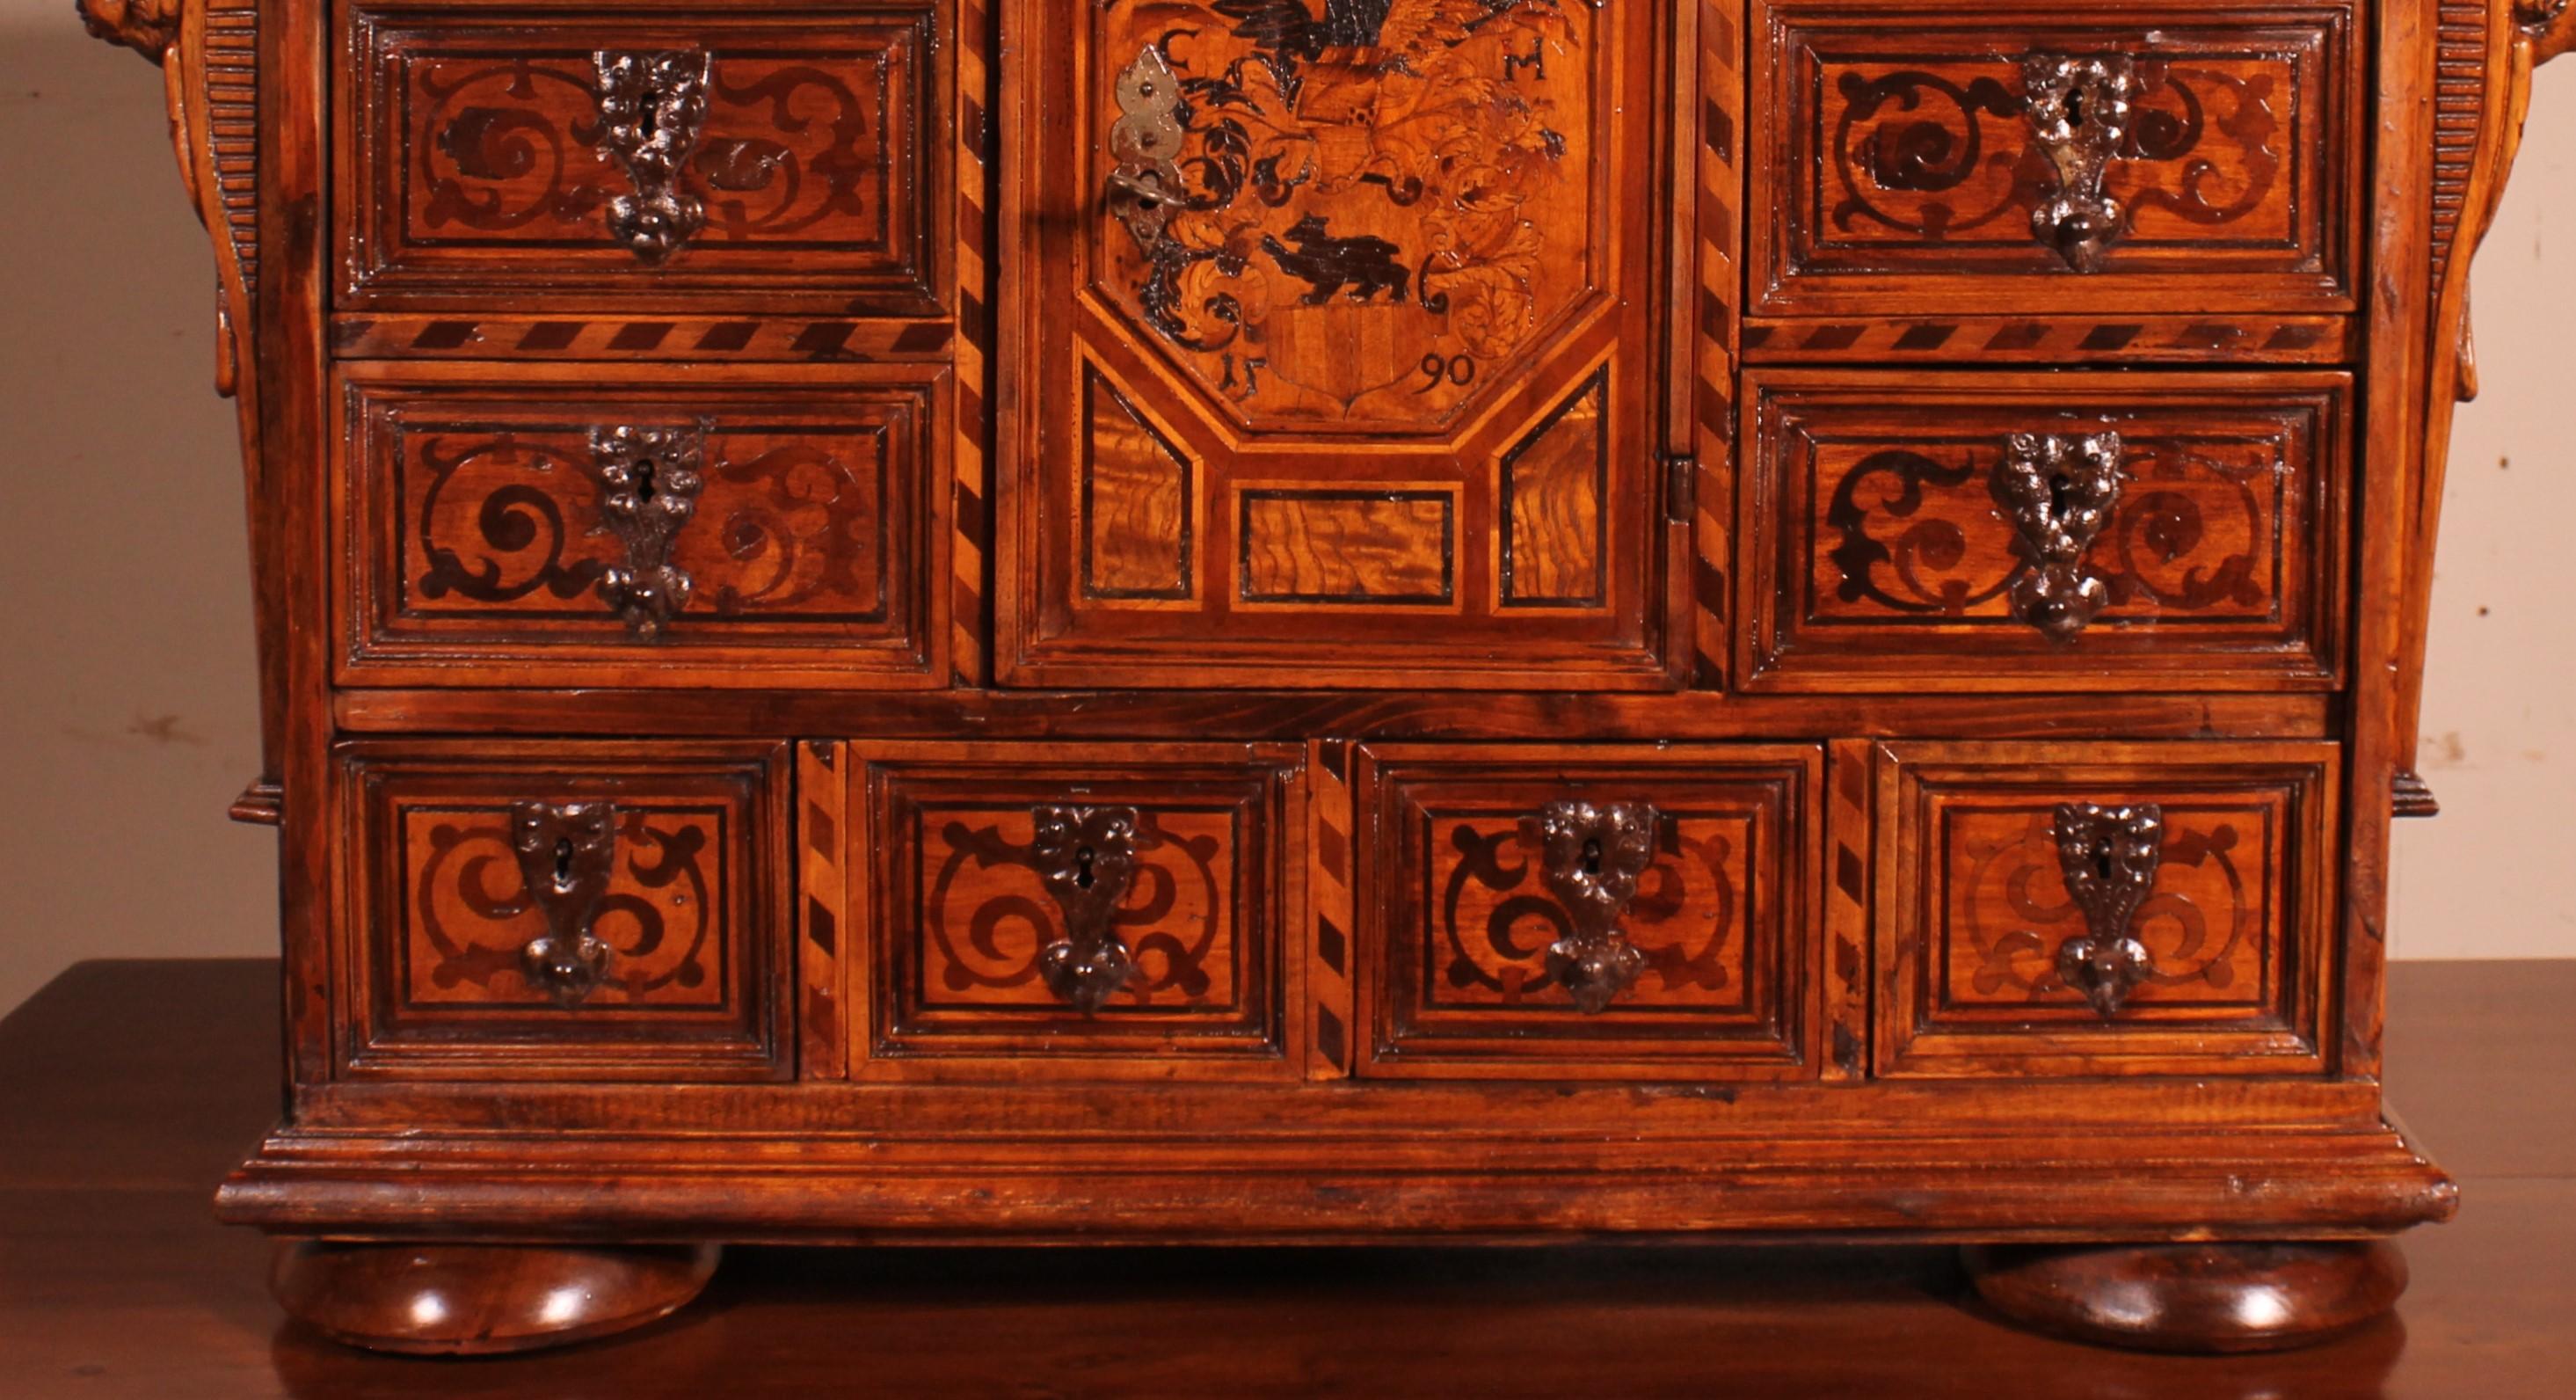 Very beautiful German cabinet probably black forest dated 1590 in walnut.

The drawers as well as the door have superb chiseled locks. Which is a monumental work and a sign of the beautiful provenance of the cabinet.

The door is decorated with two